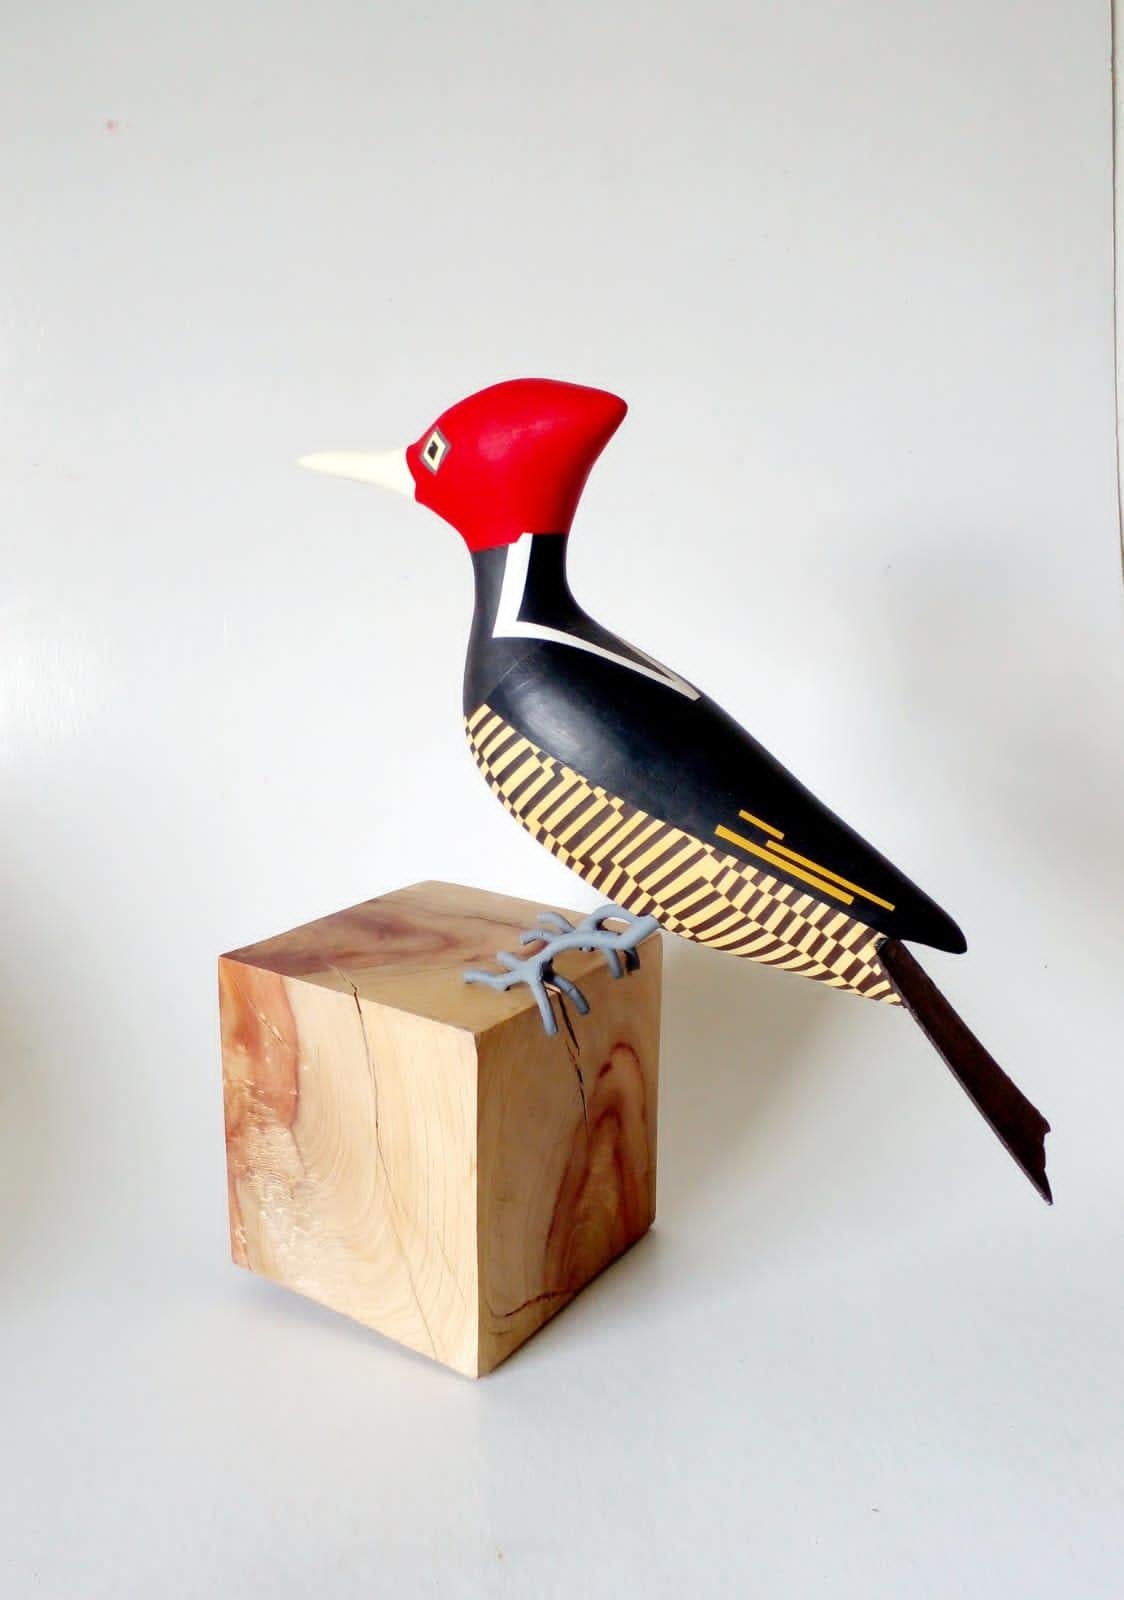 Woodpecker Campephilus guat
Contemporary Art, Sustainable Art
Reclaimed Wood
Limited Edition
Signed

About the artist 

The beauty of nature
Davit Nava’s work focuses on showing the beauty of nature by creating sustainable art that seeks to raise